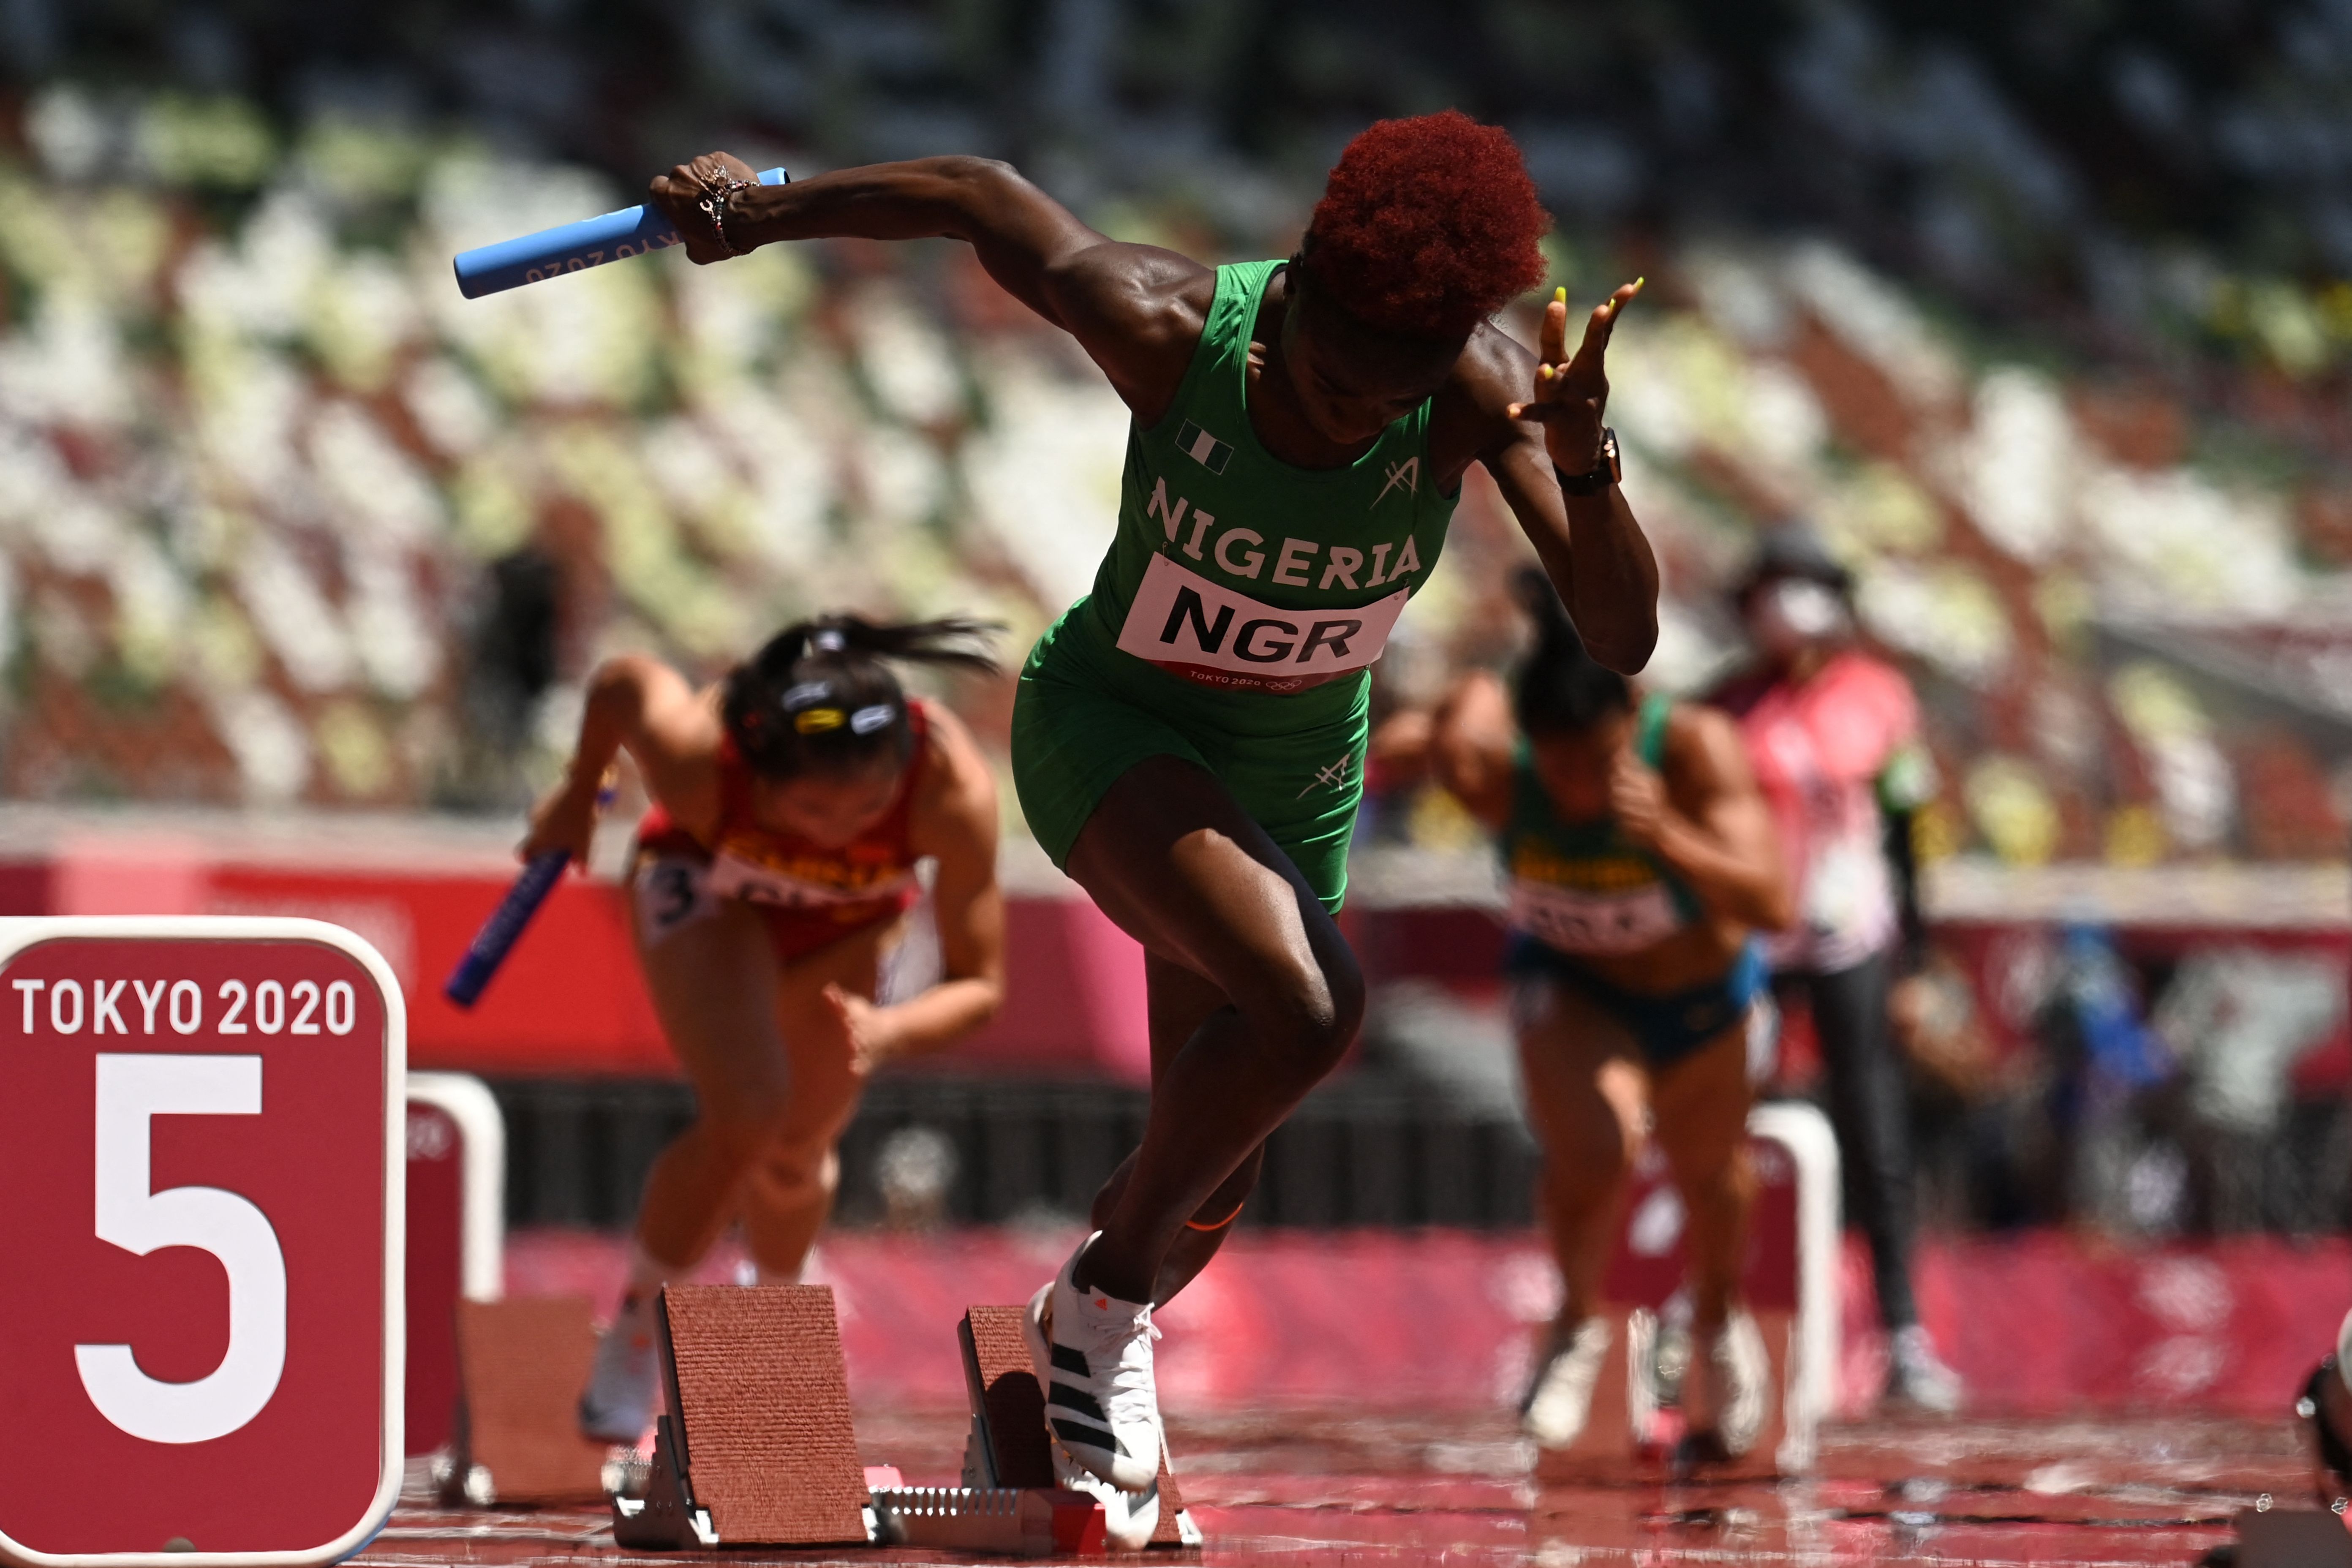  Nigeria's Tobi Amusan competes in the women's 4x100m relay heats during the Tokyo 2020 Olympic Games at the Olympic Stadium in Tokyo on August 5